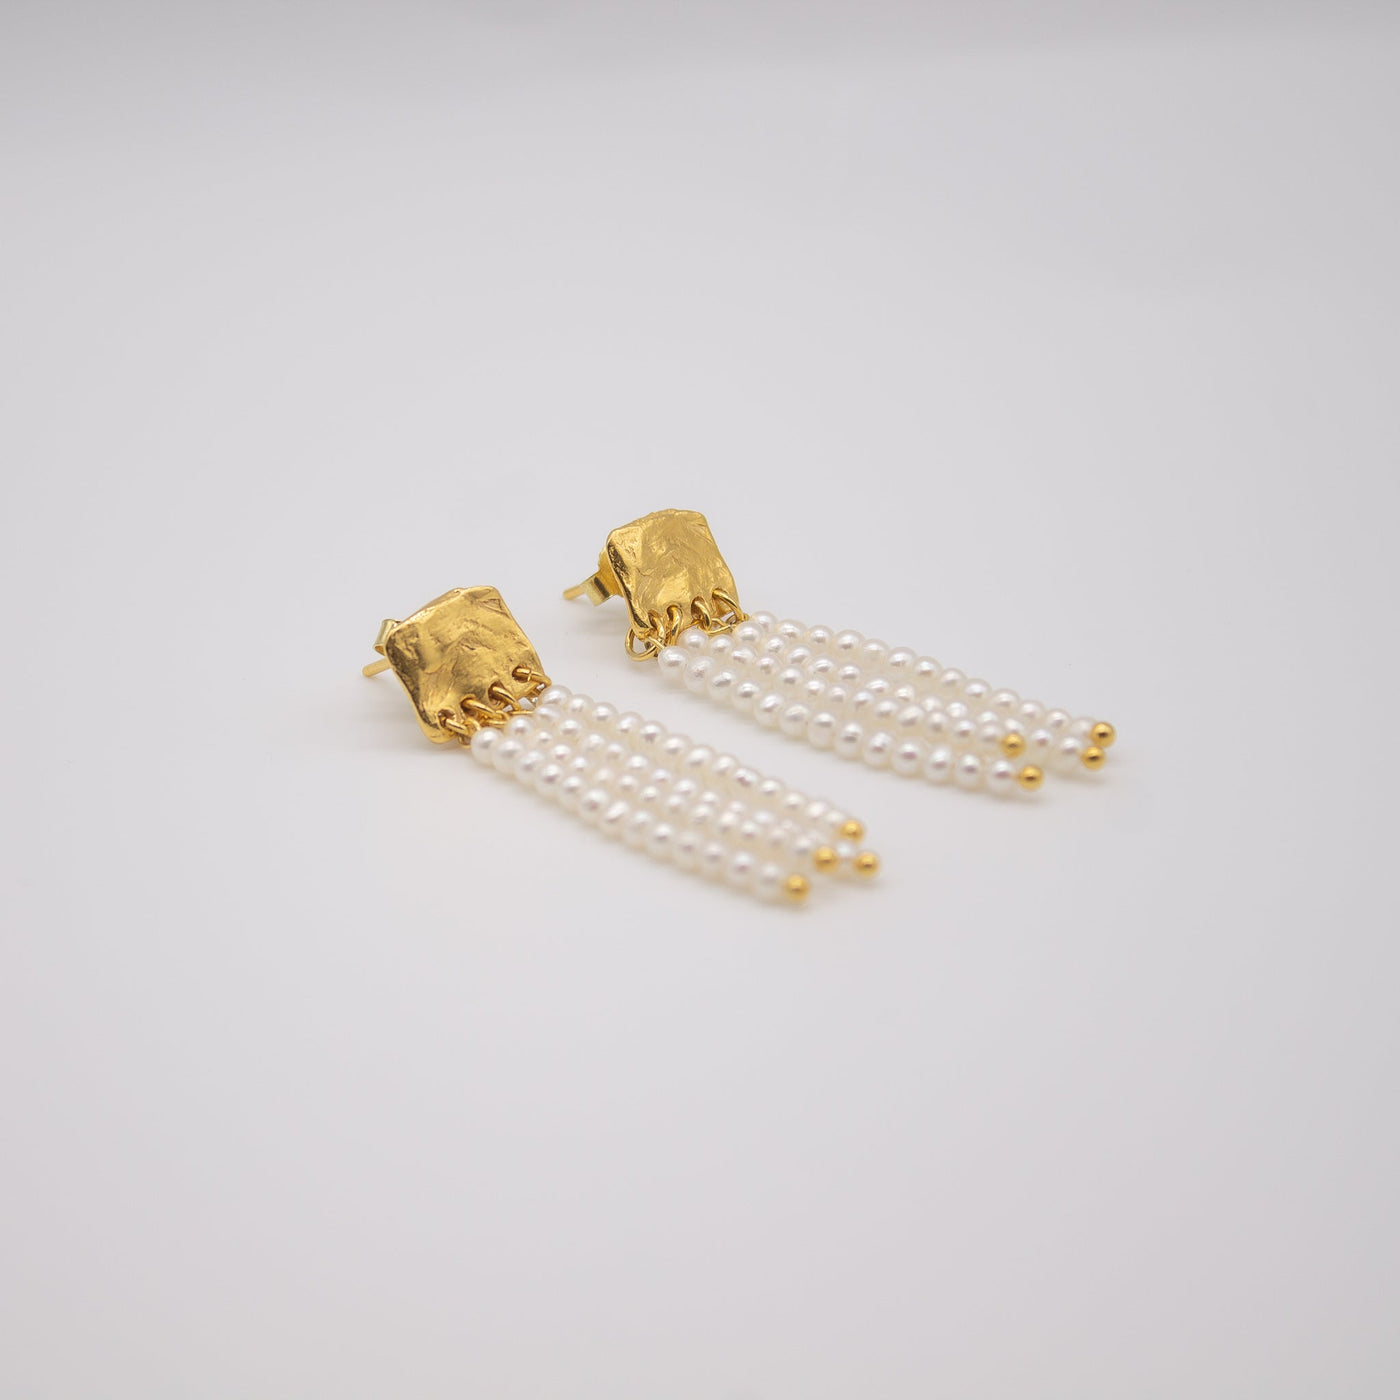 Bridal jewelry SUNDBY // Ear studs gold-plated with delicate freshwater pearls